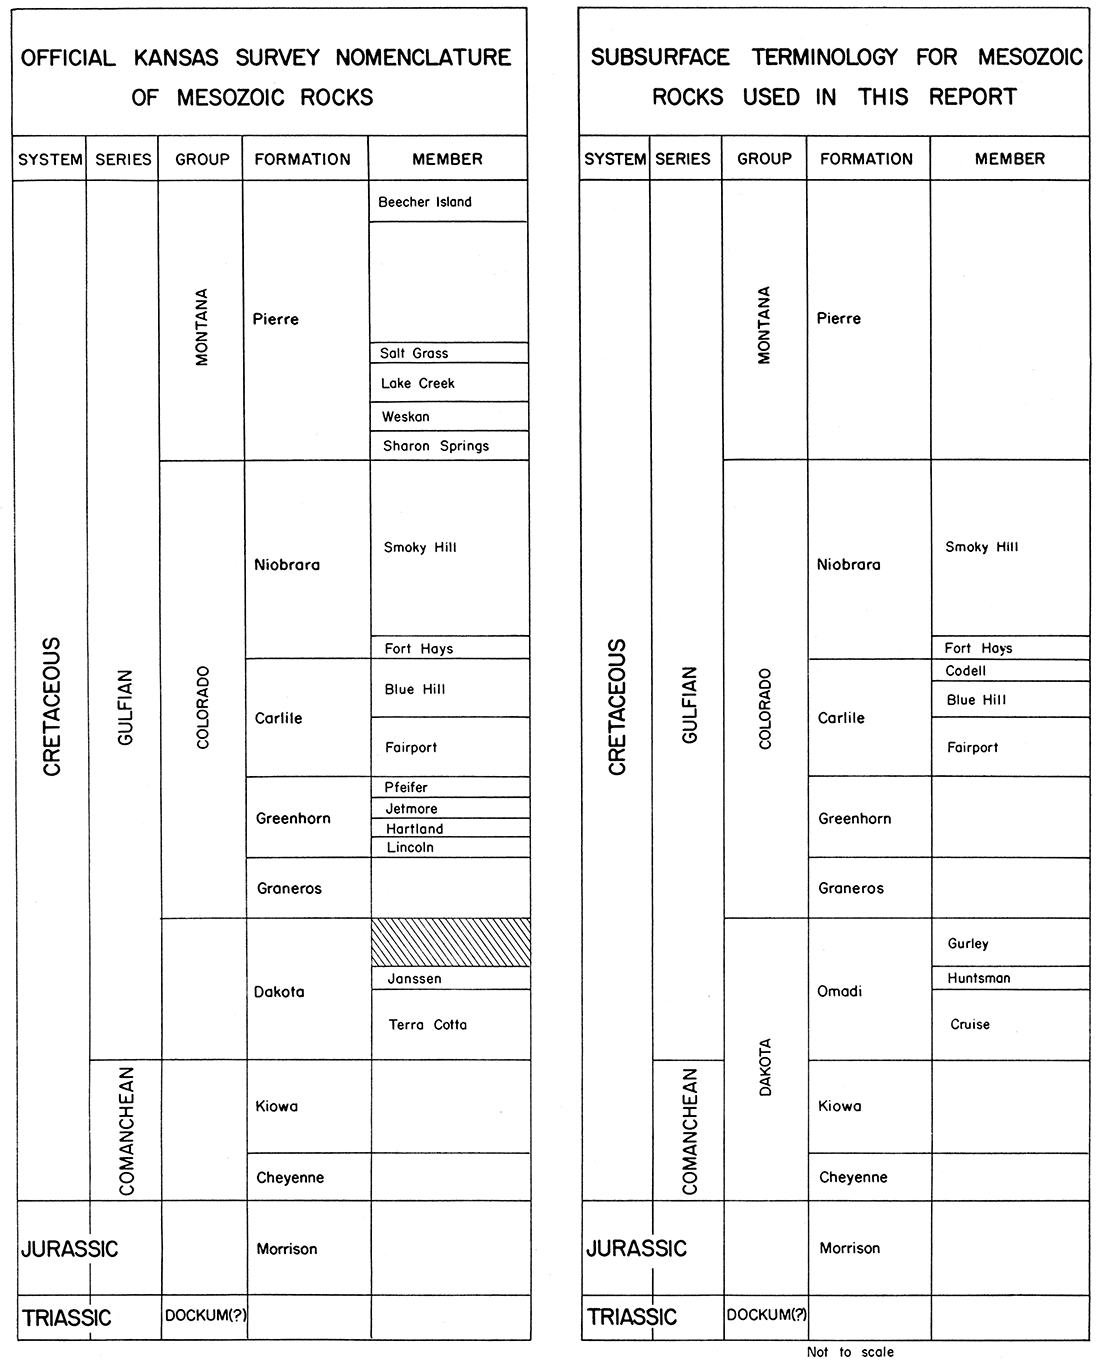 Chart showing the present official Kansas Survey nomenclature of Mesozoic rocks and equivalent terminology used in the subsurface for the same rock units.